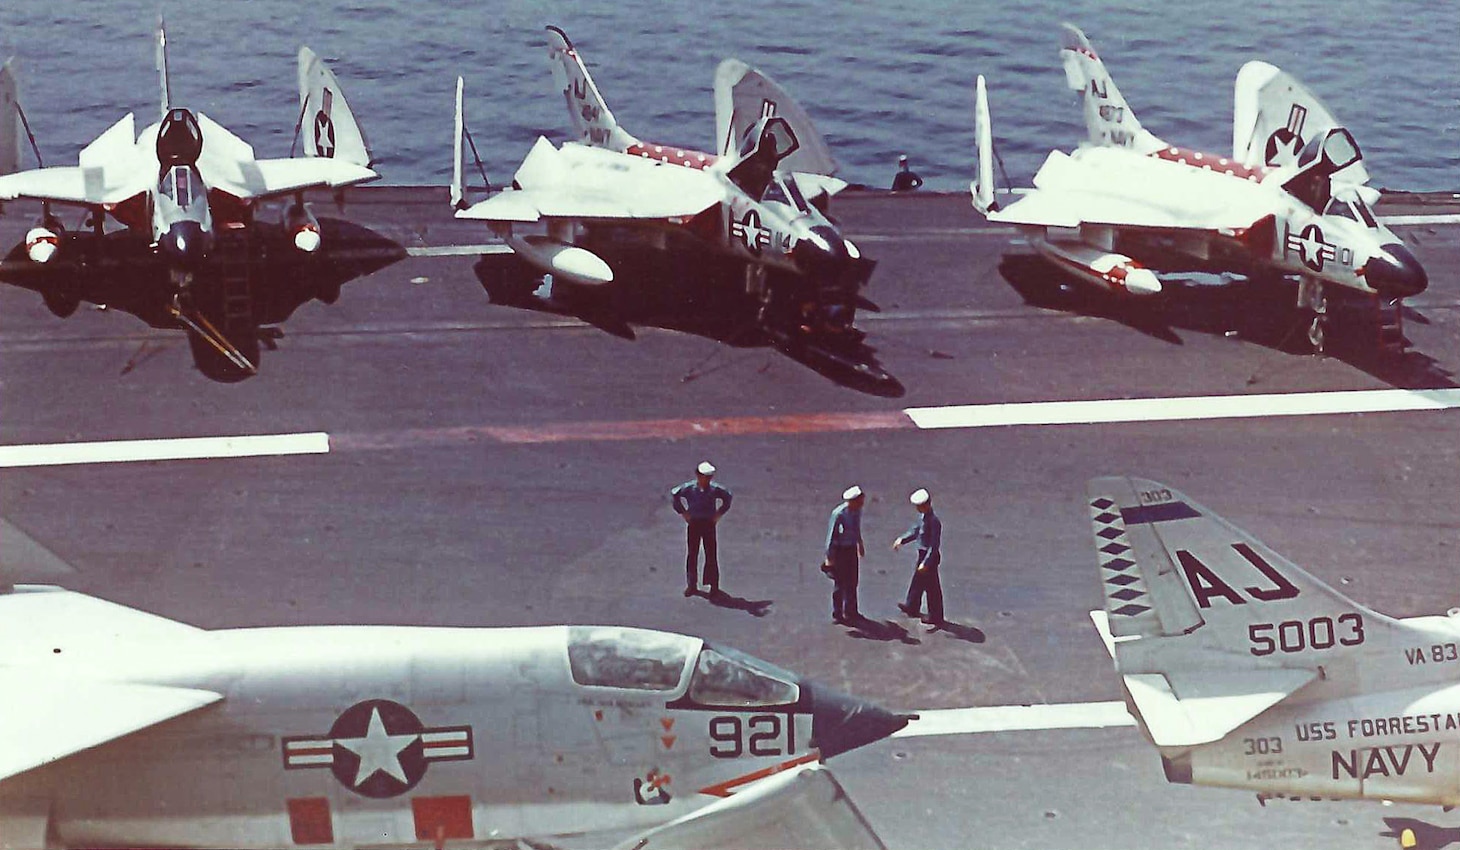 F4D Skyrays of Fighting Squadron (VF) 102 line the flight deck of the USS Forrestal (CVA 59) during a Med cruise in 1960. An F8U-1P (later RF-8A, post-October 1962) Crusader of VFP-62 and an A4D-2 (later A-4B, post-October 1962, of Attack Squadron 83) Skyhawk share the deck in the foreground.